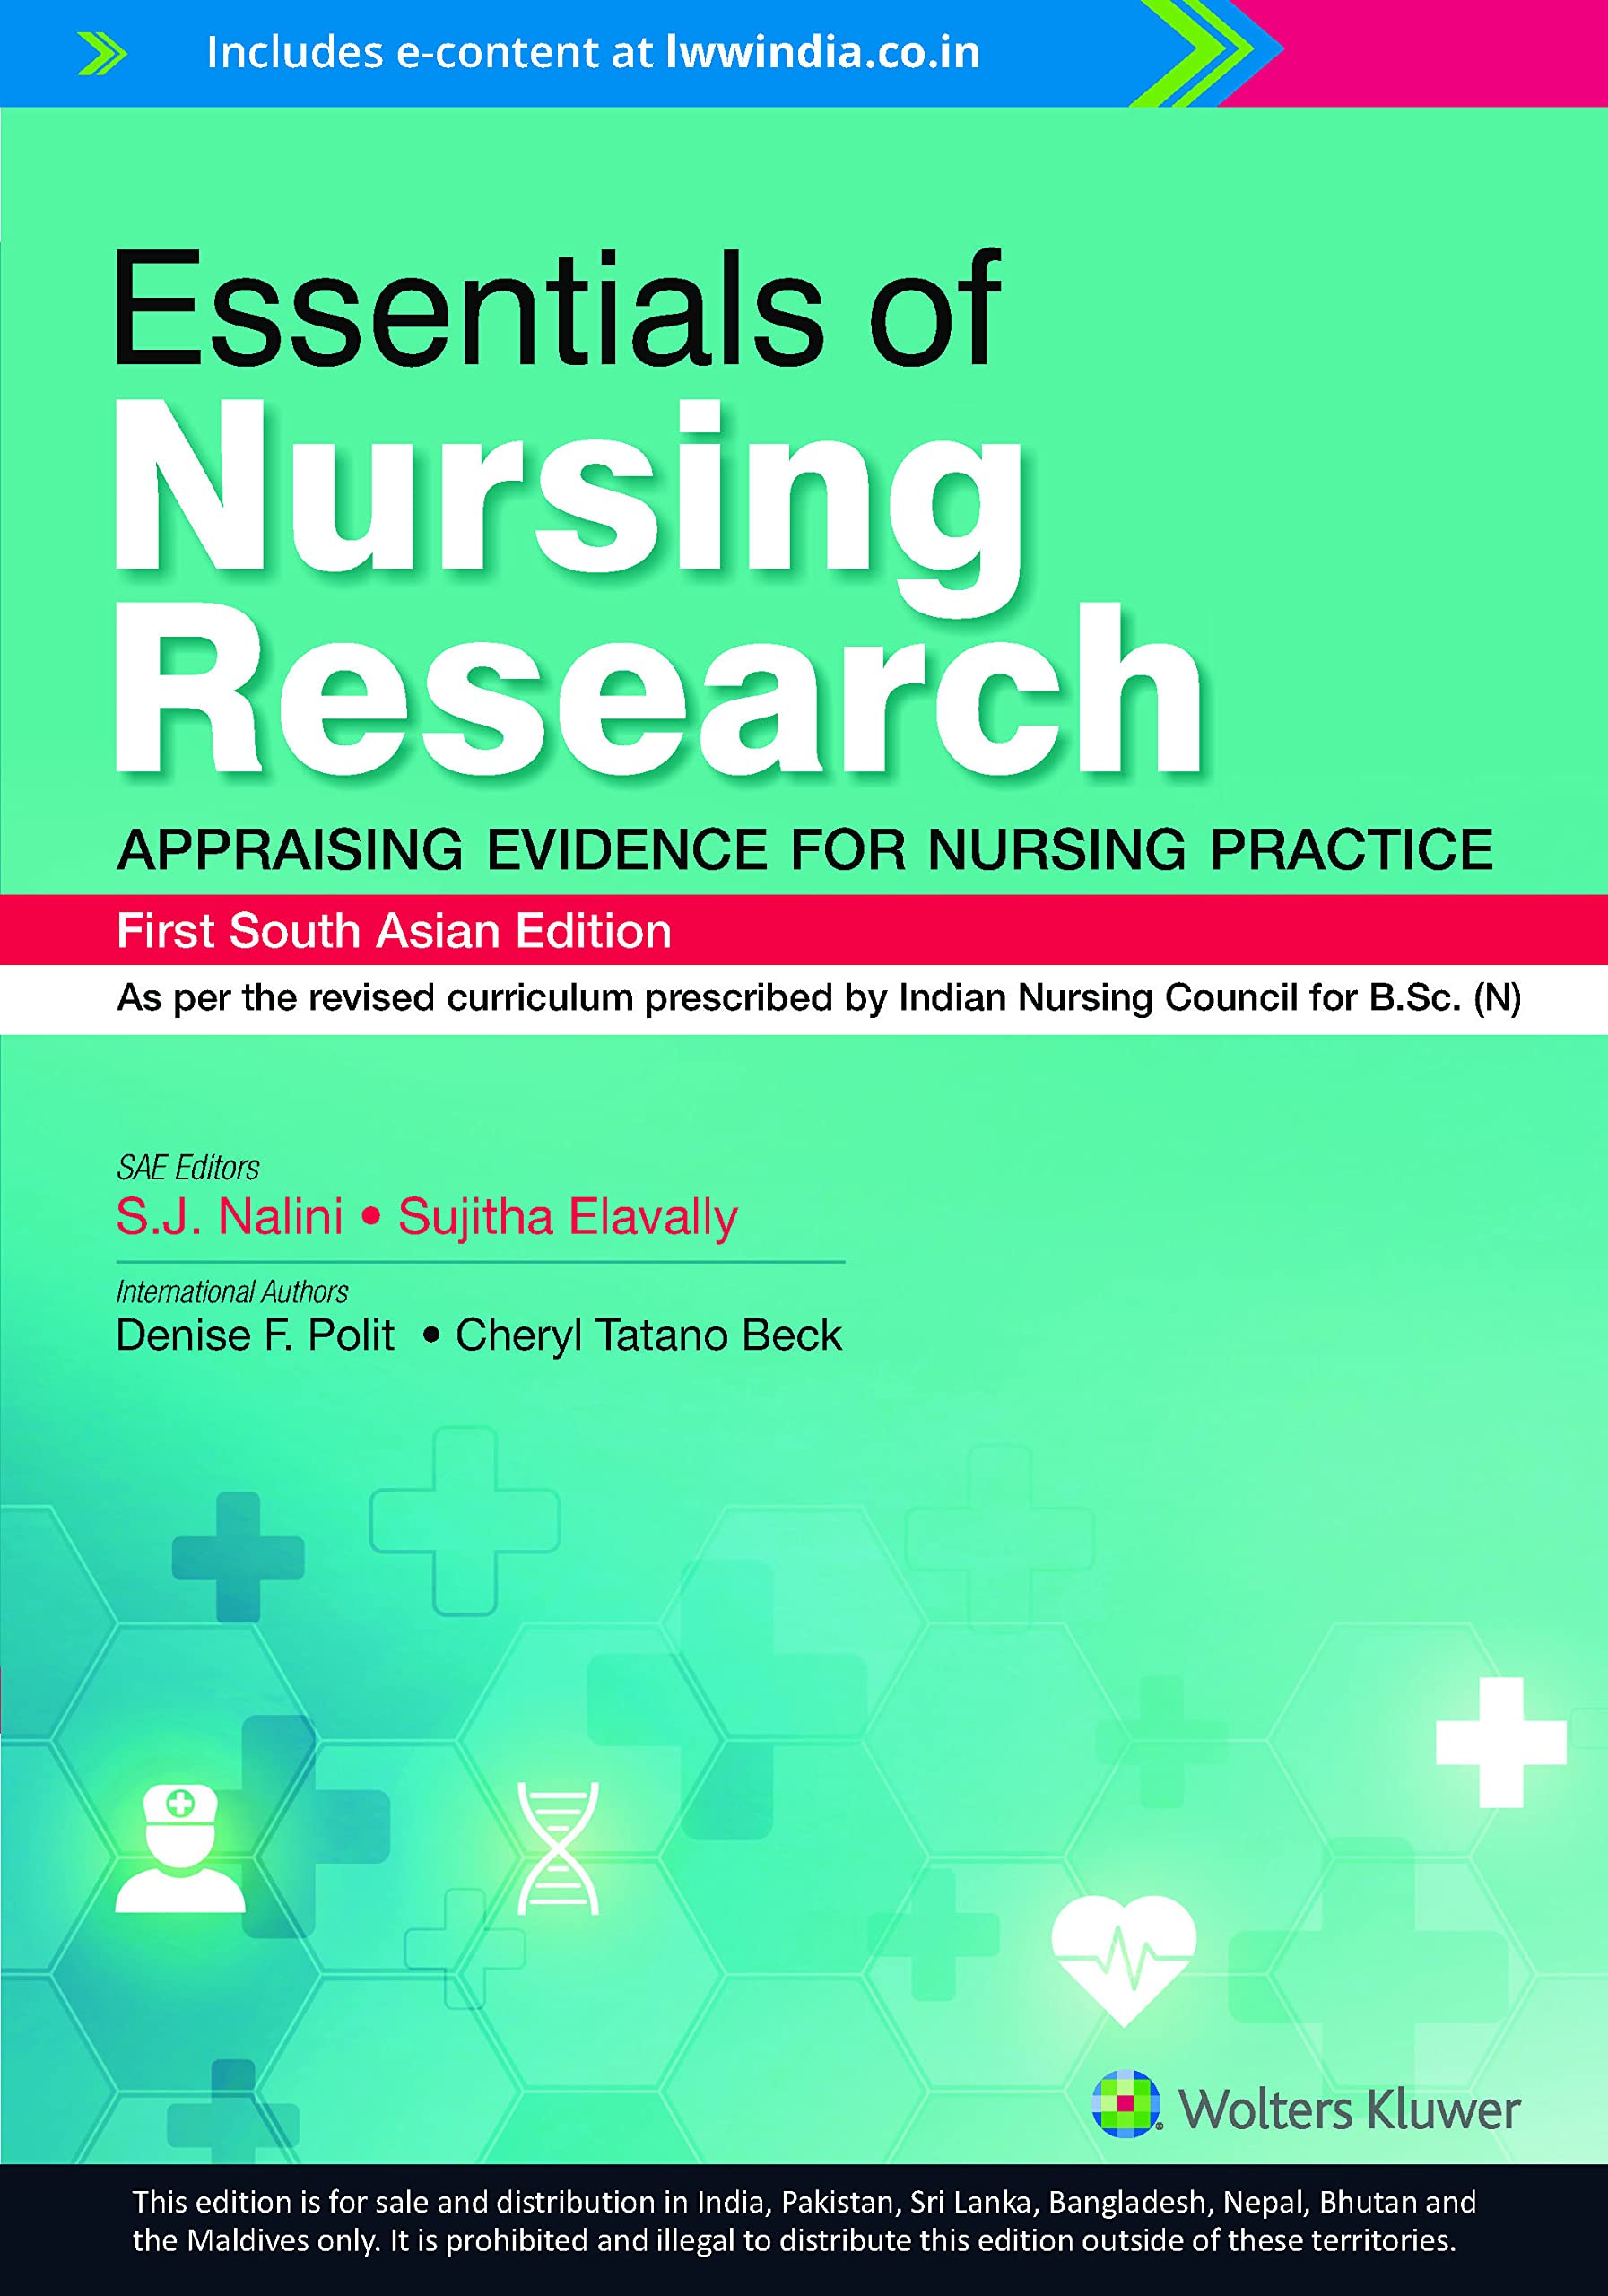 Essentials of Nursing Research—Appraising Evidence for Nursing Practice (South Asia Edition)